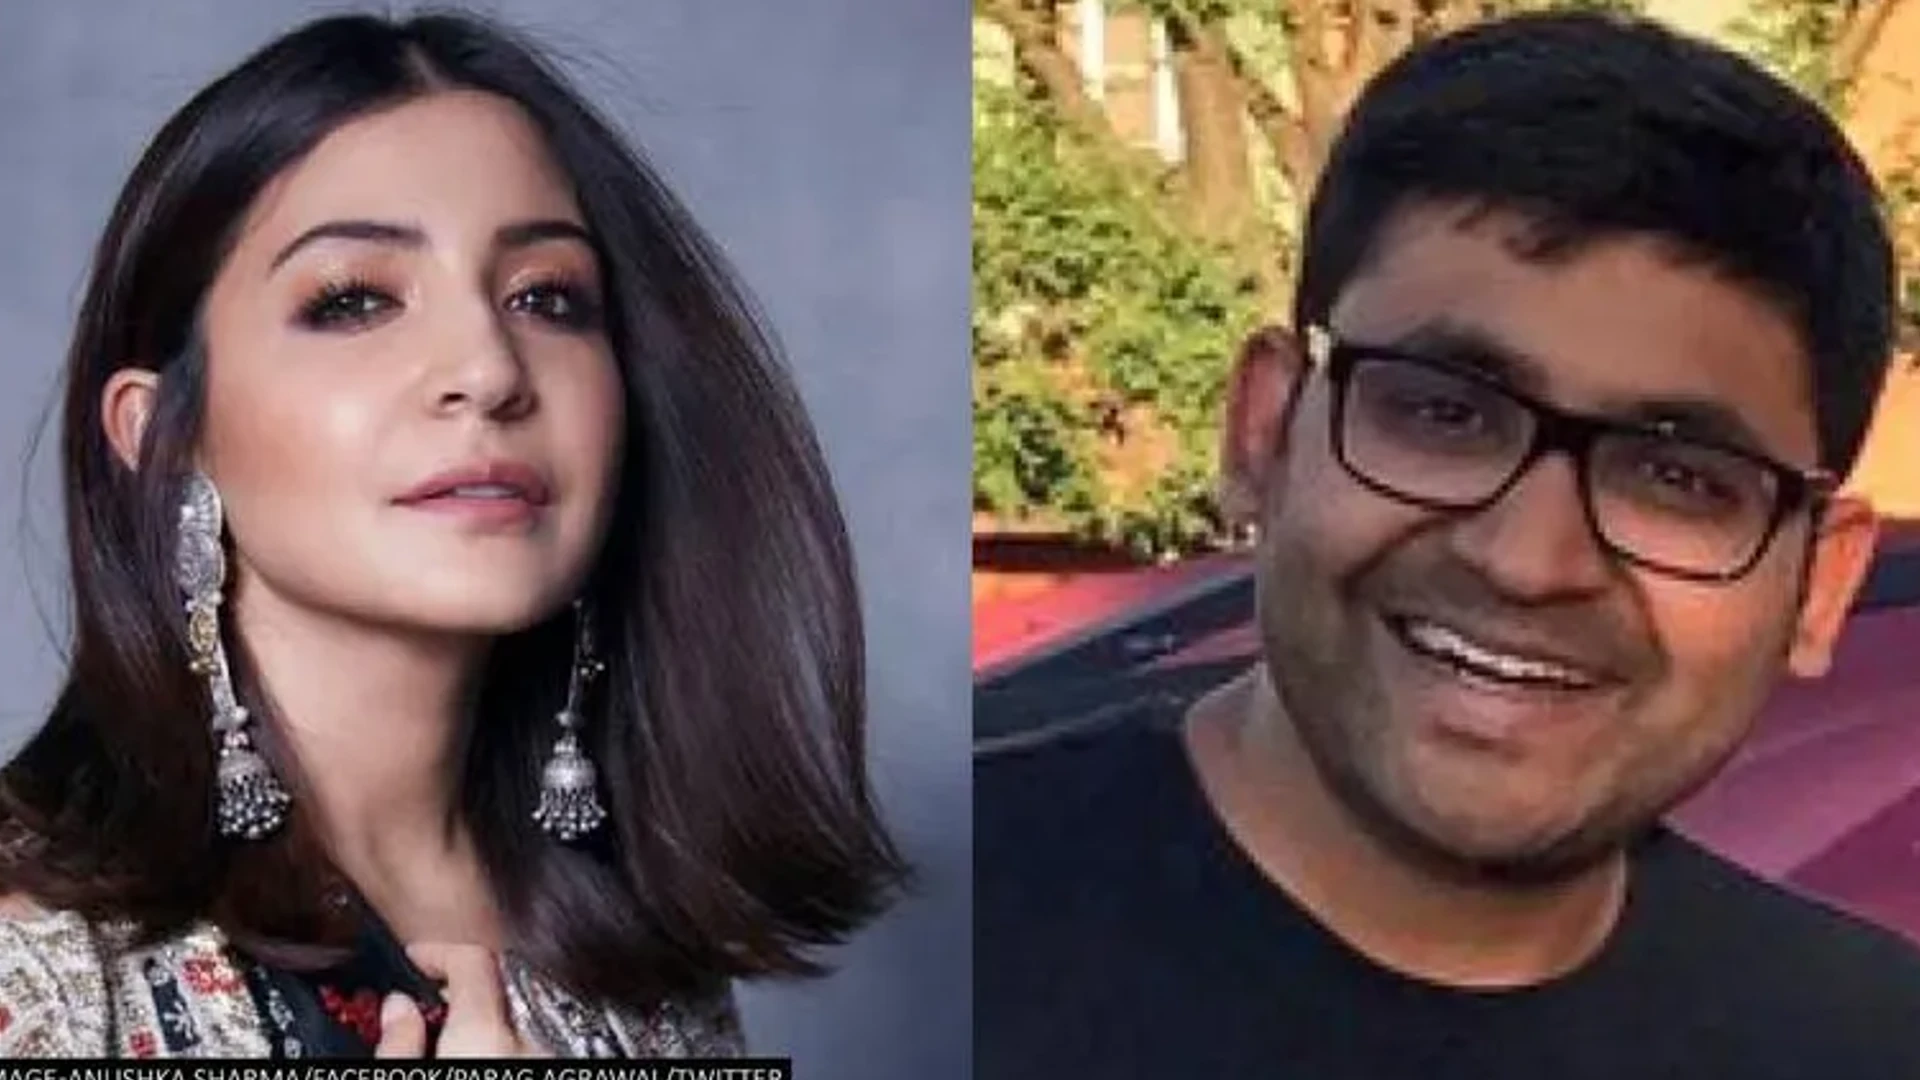 Anushka Sharma Applauds Twitter CEO Parag Agarwal’s decision to take Paternity Leave, saying ‘About Time This Is Normalized’